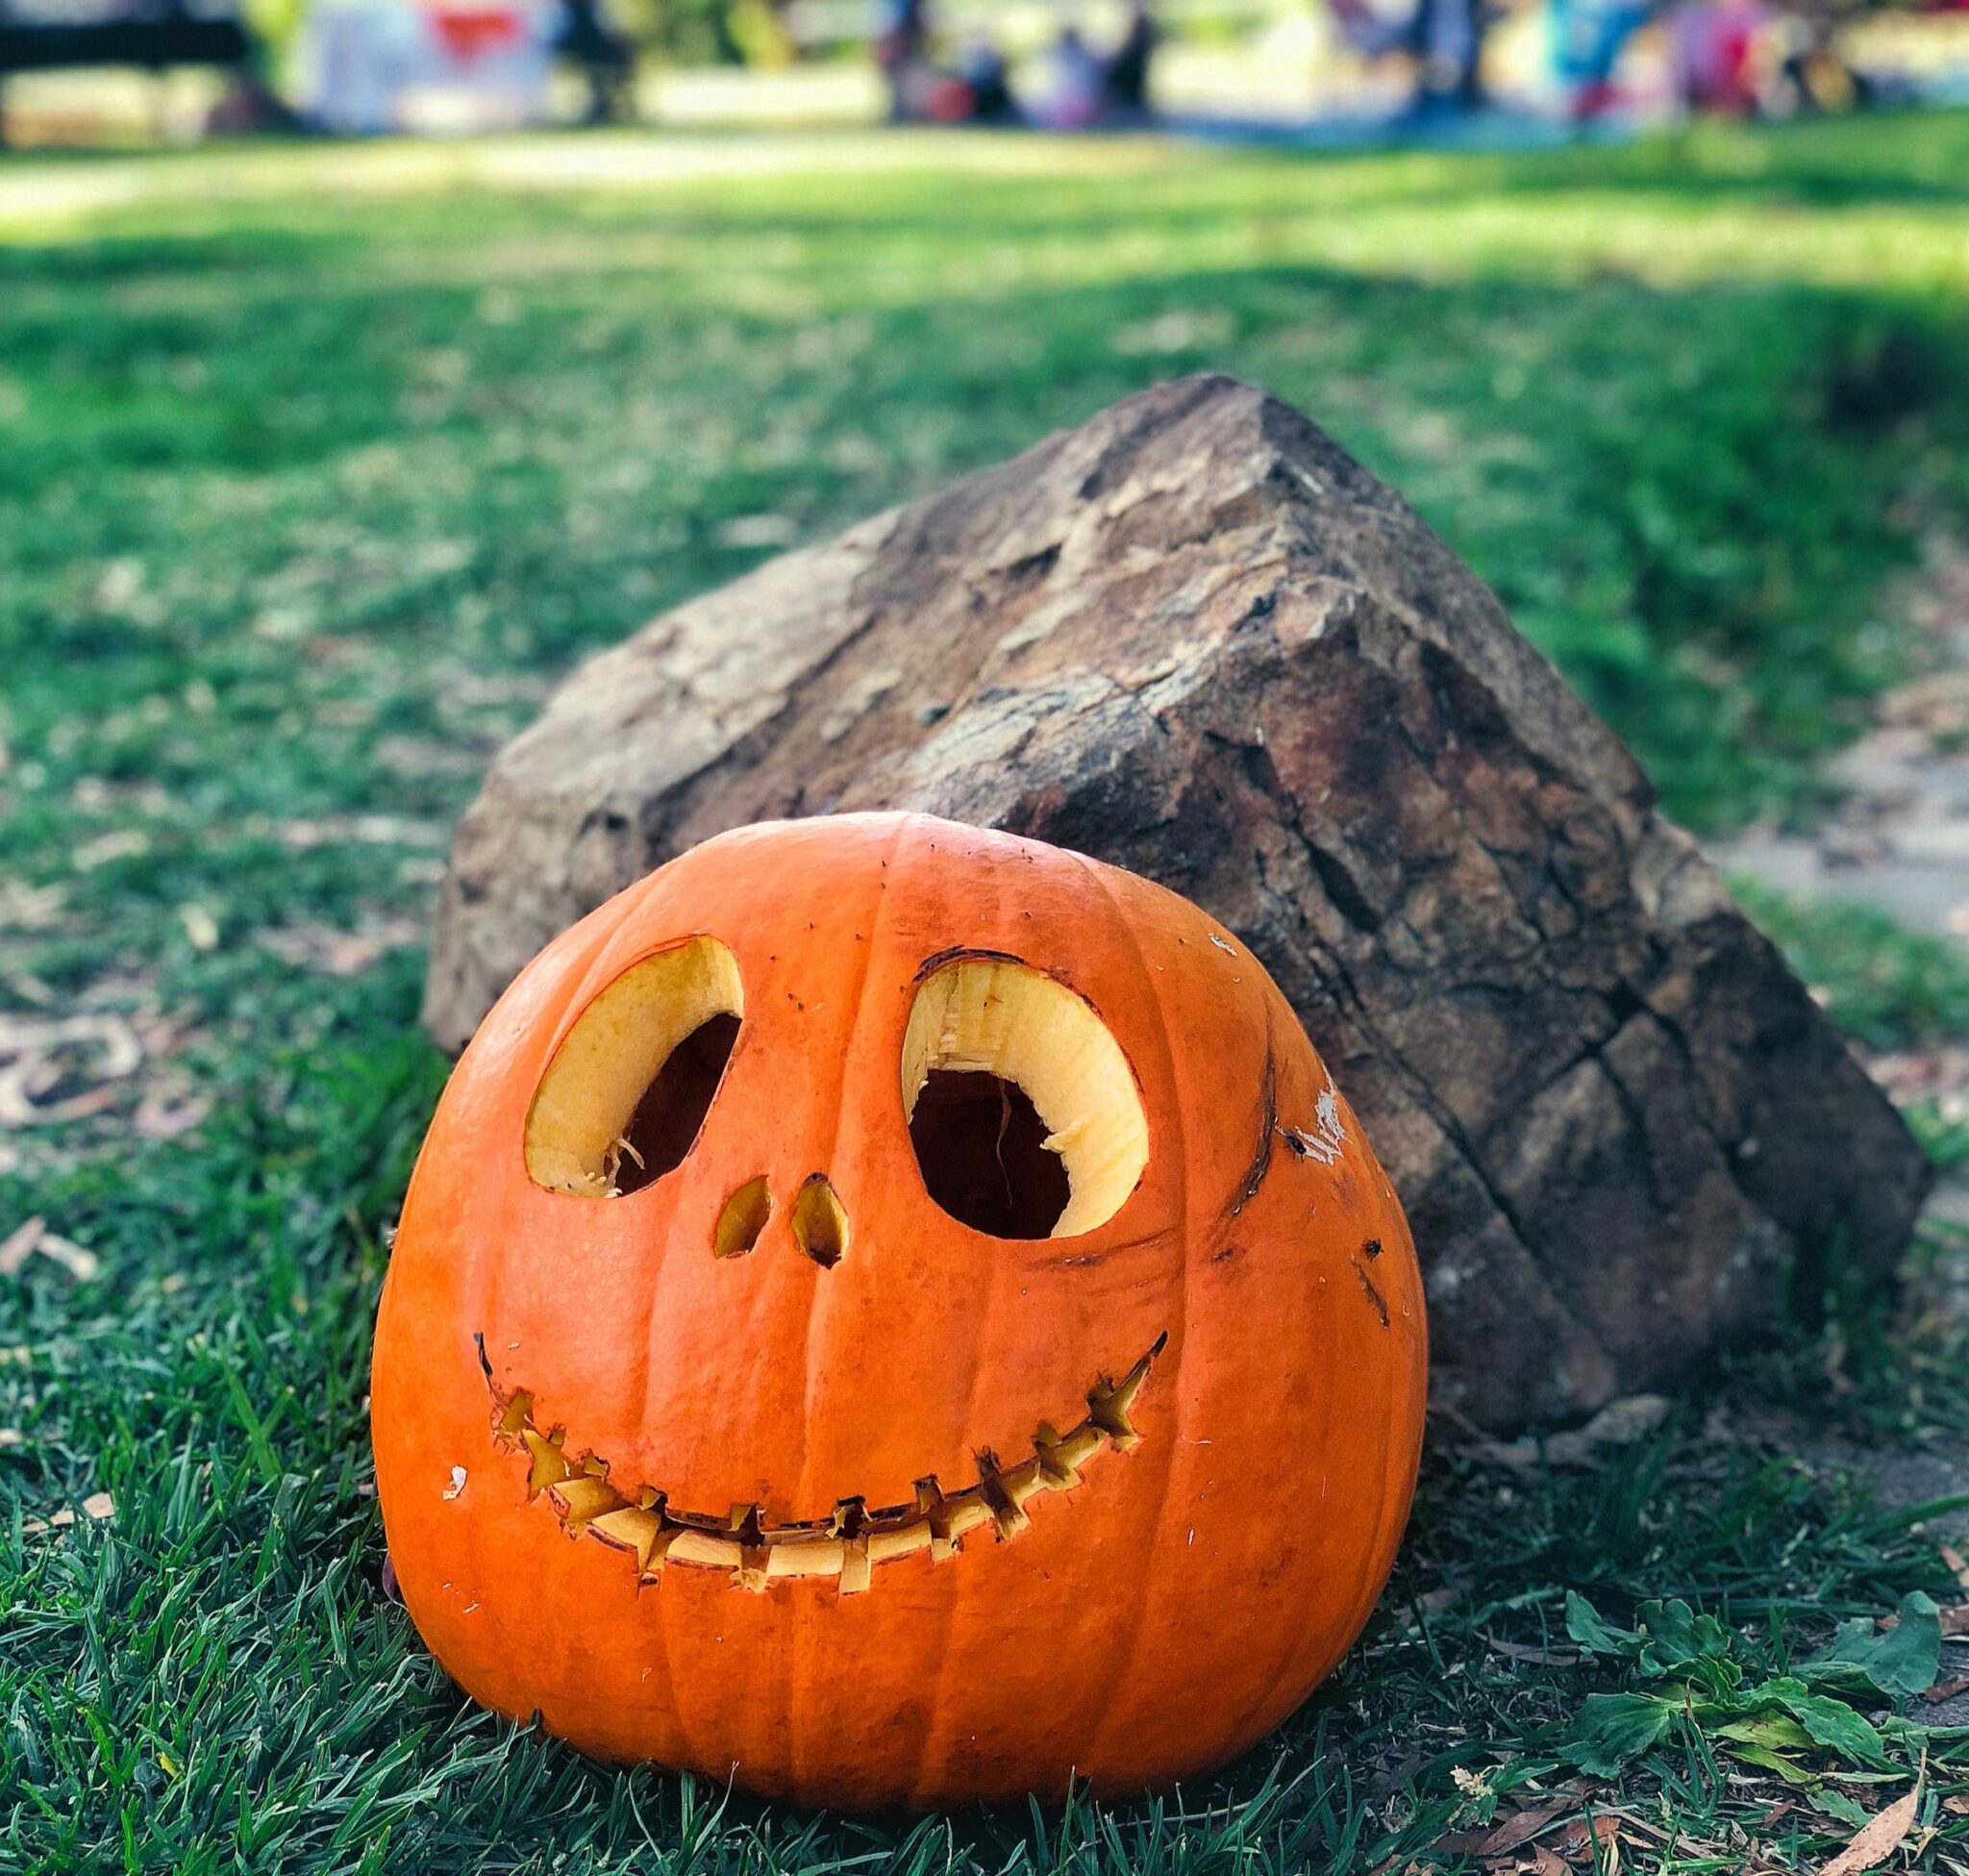 A smiling jack-o-lantern sits on the grass near an outdoor Halloween party